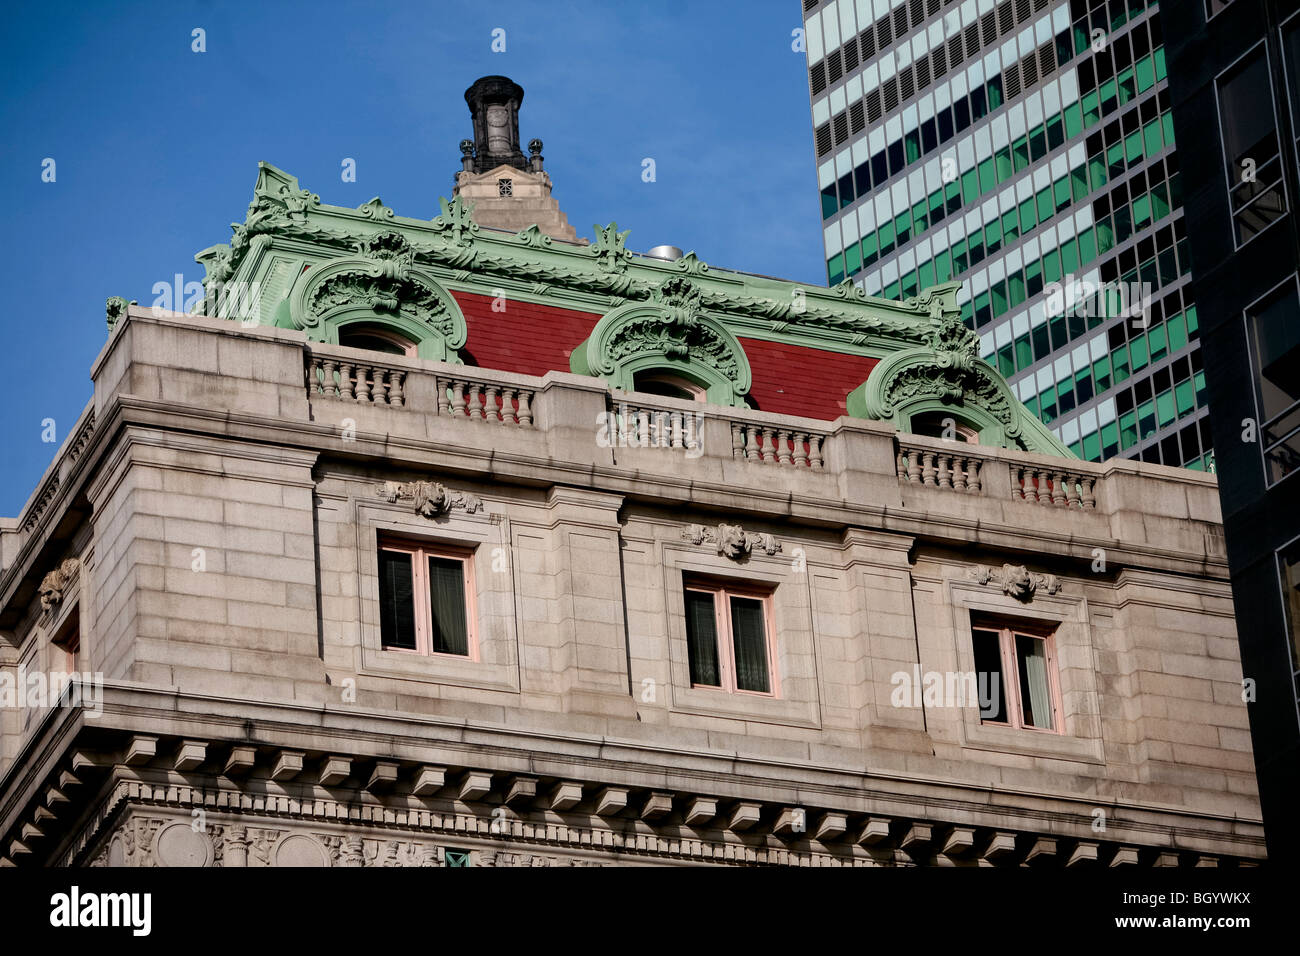 Downtown New York architecture and facade of old and modern buildings. Stock Photo